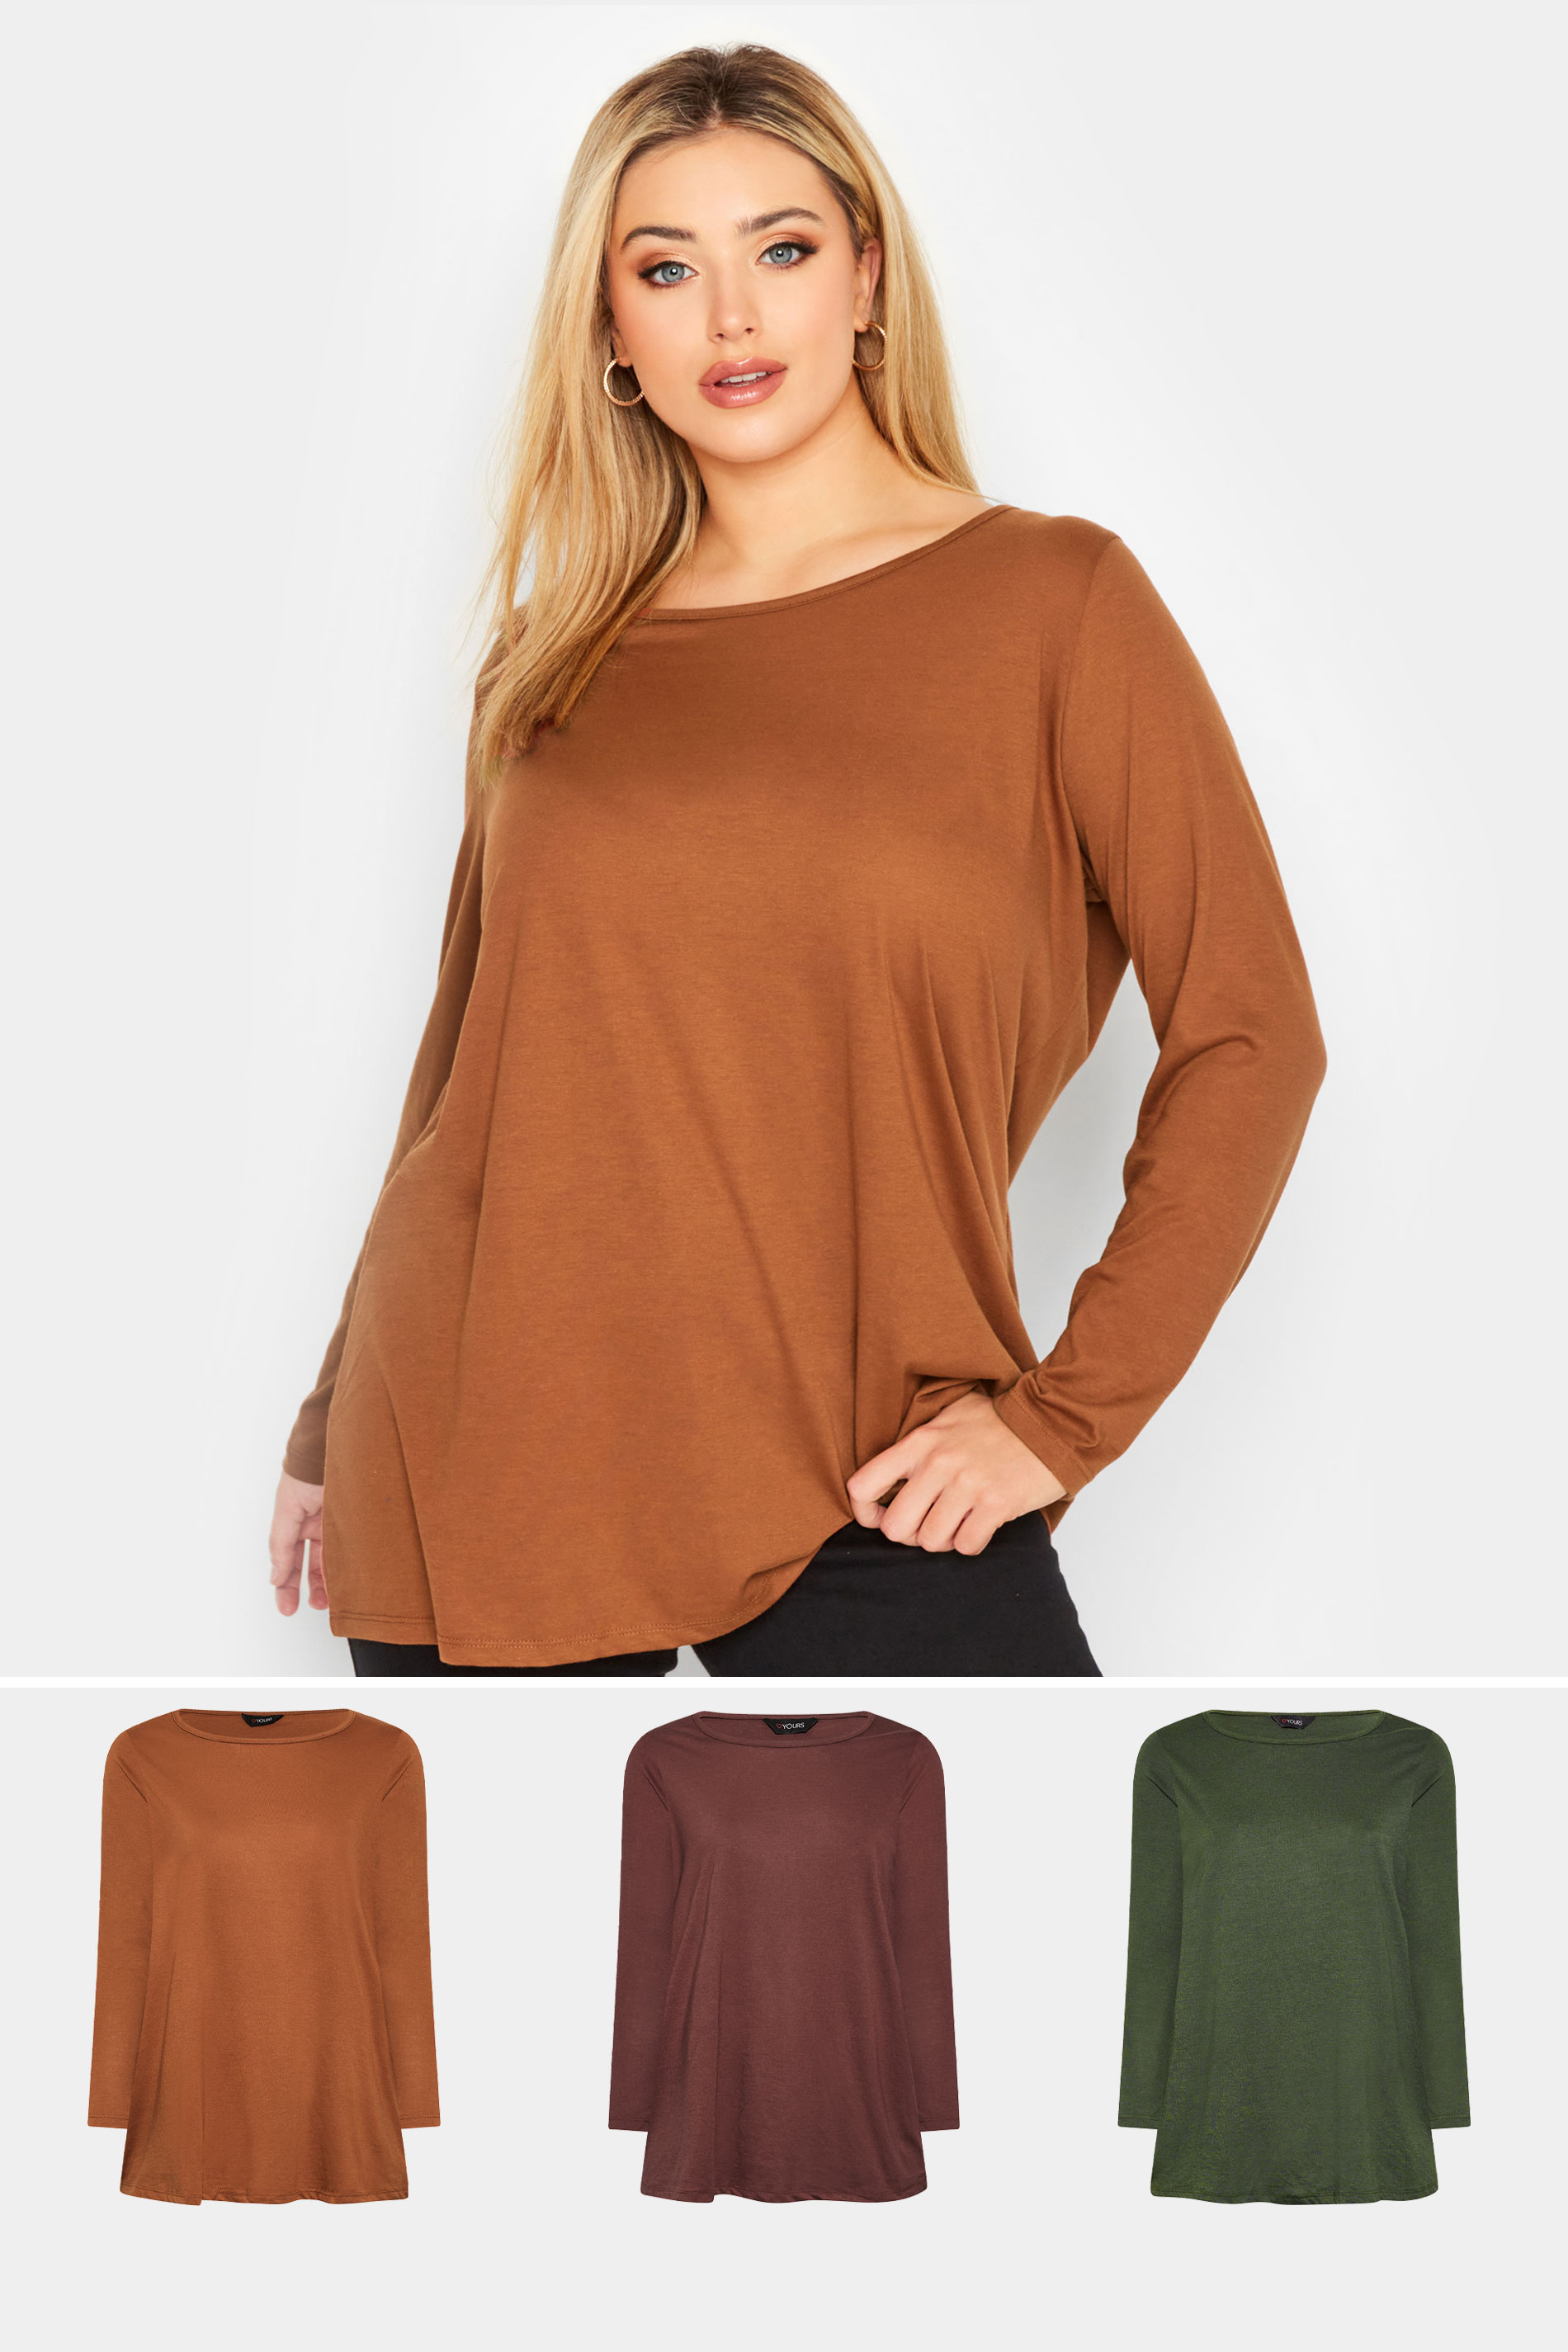 3 PACK Plus Size Brown & Green Long Sleeve T-Shirts | Yours Clothing 1